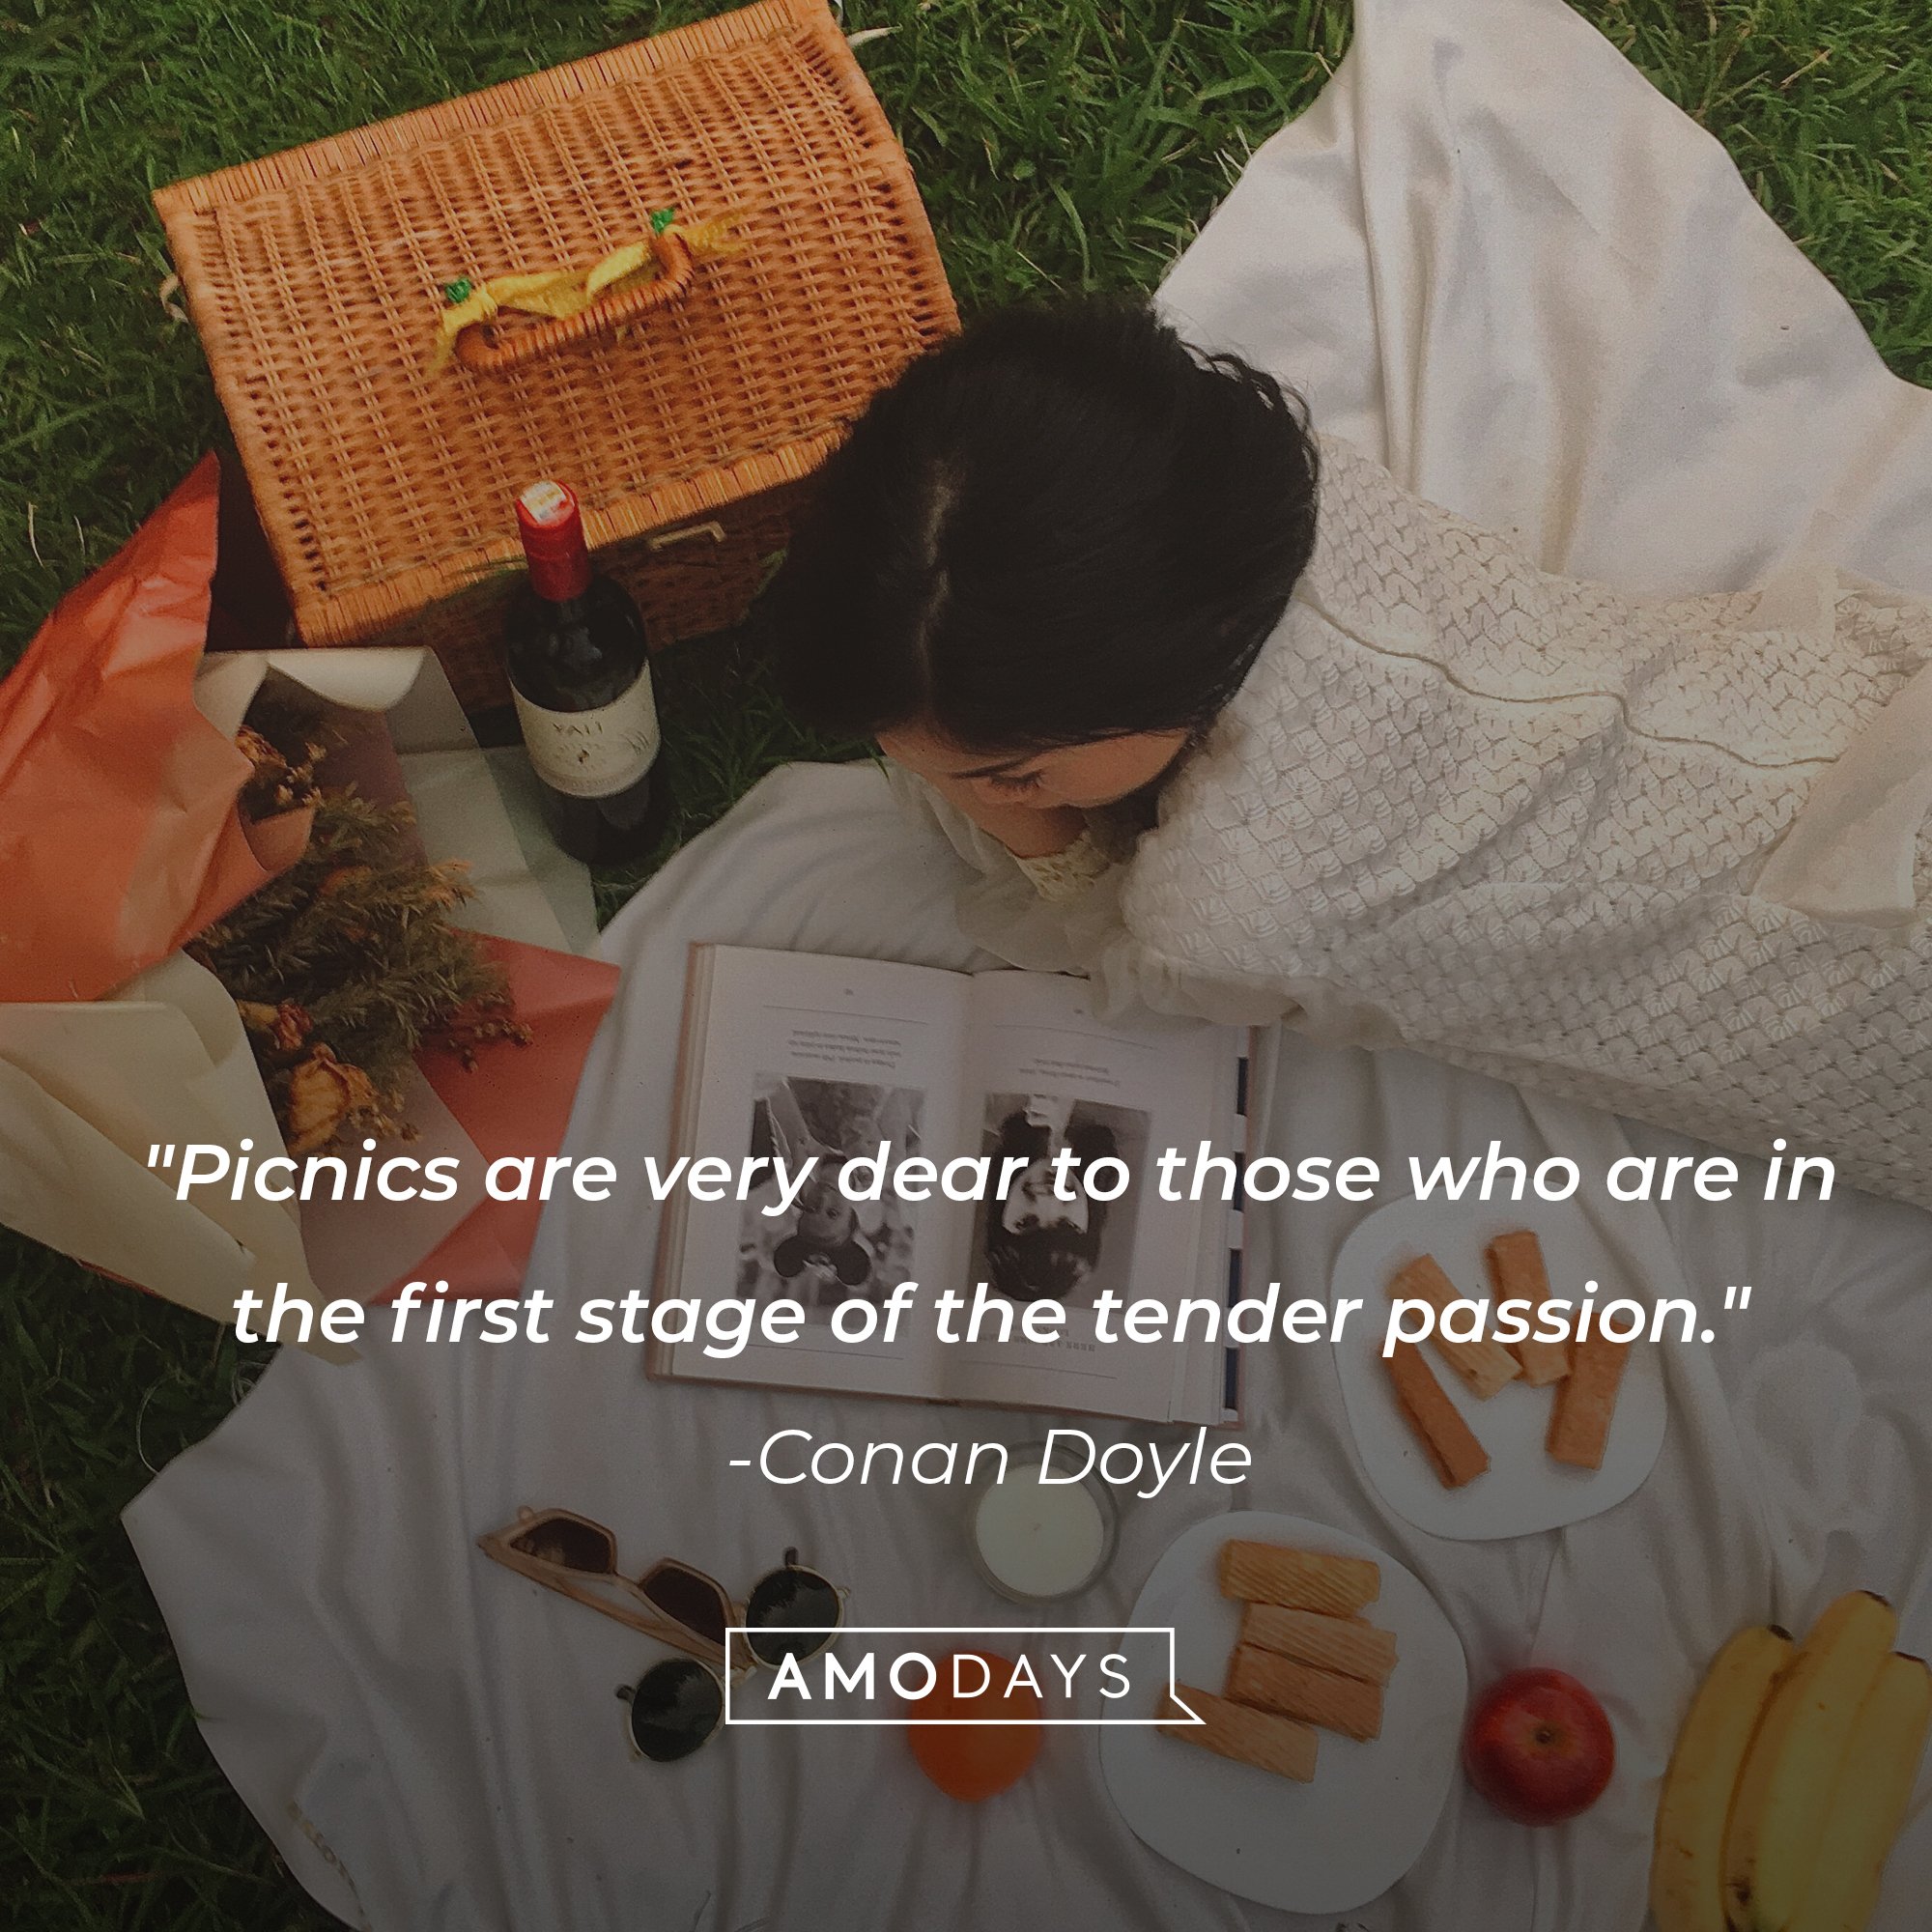 Arthur Conan Doyle's quote: "Picnics are very dear to those who are in the first stage of the tender passion." | Image: AmoDays